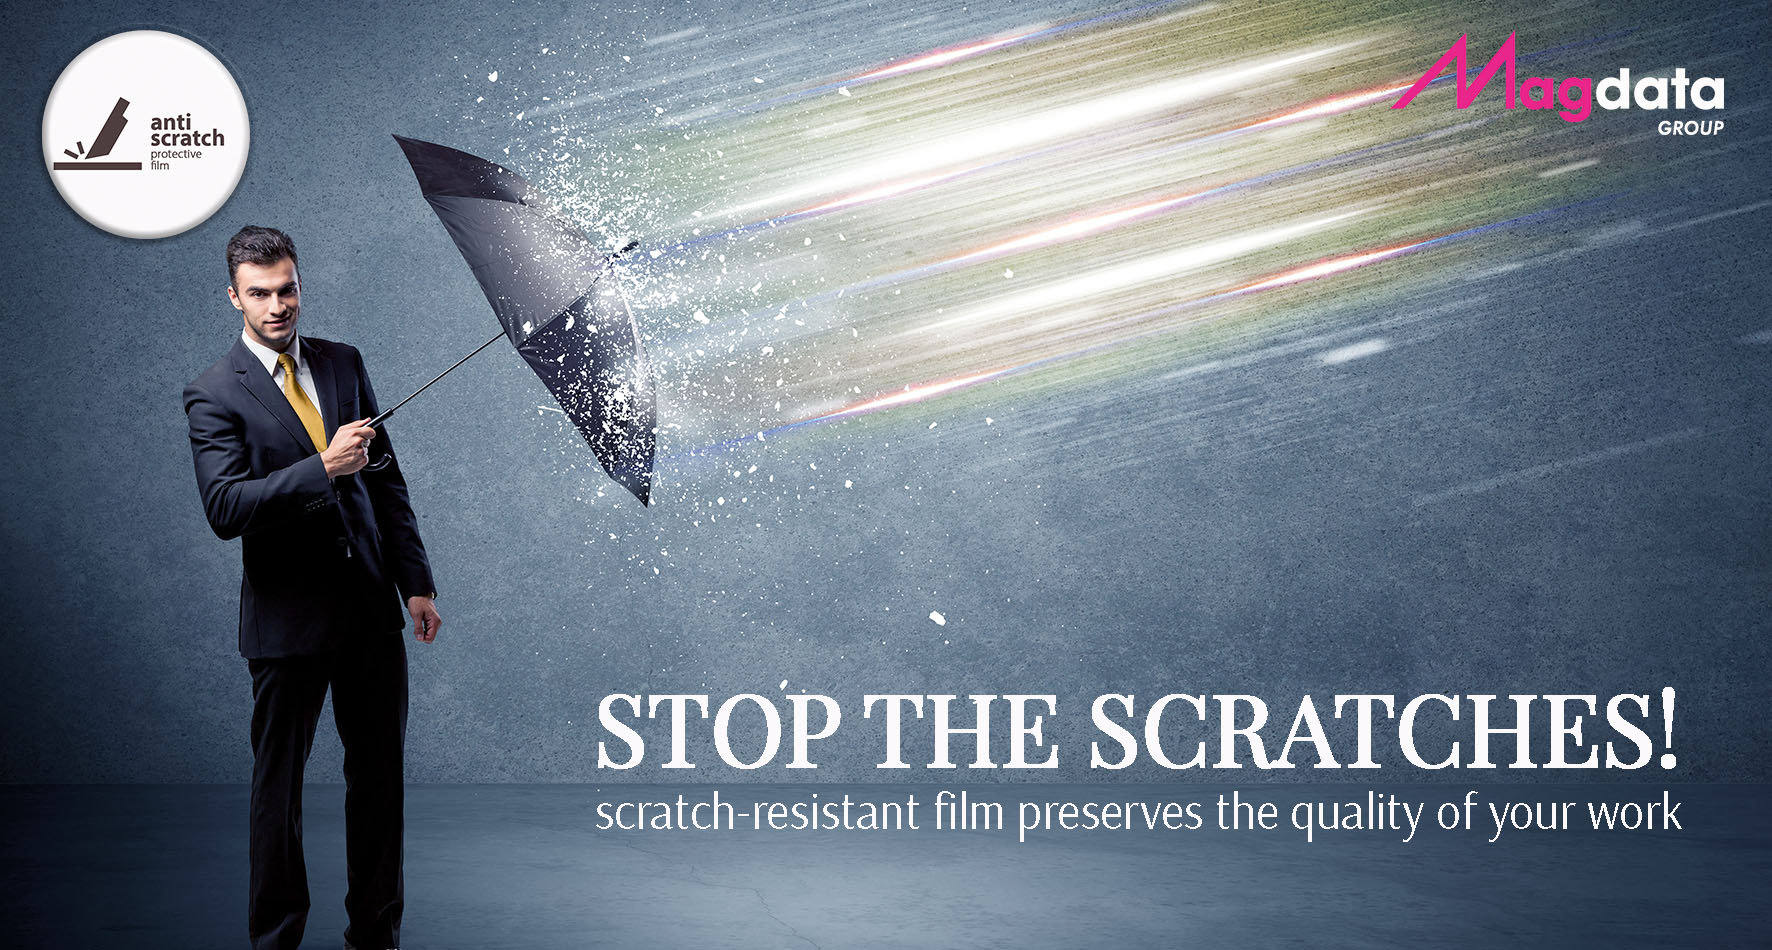 Scratch-resistant films protect the quality of your work